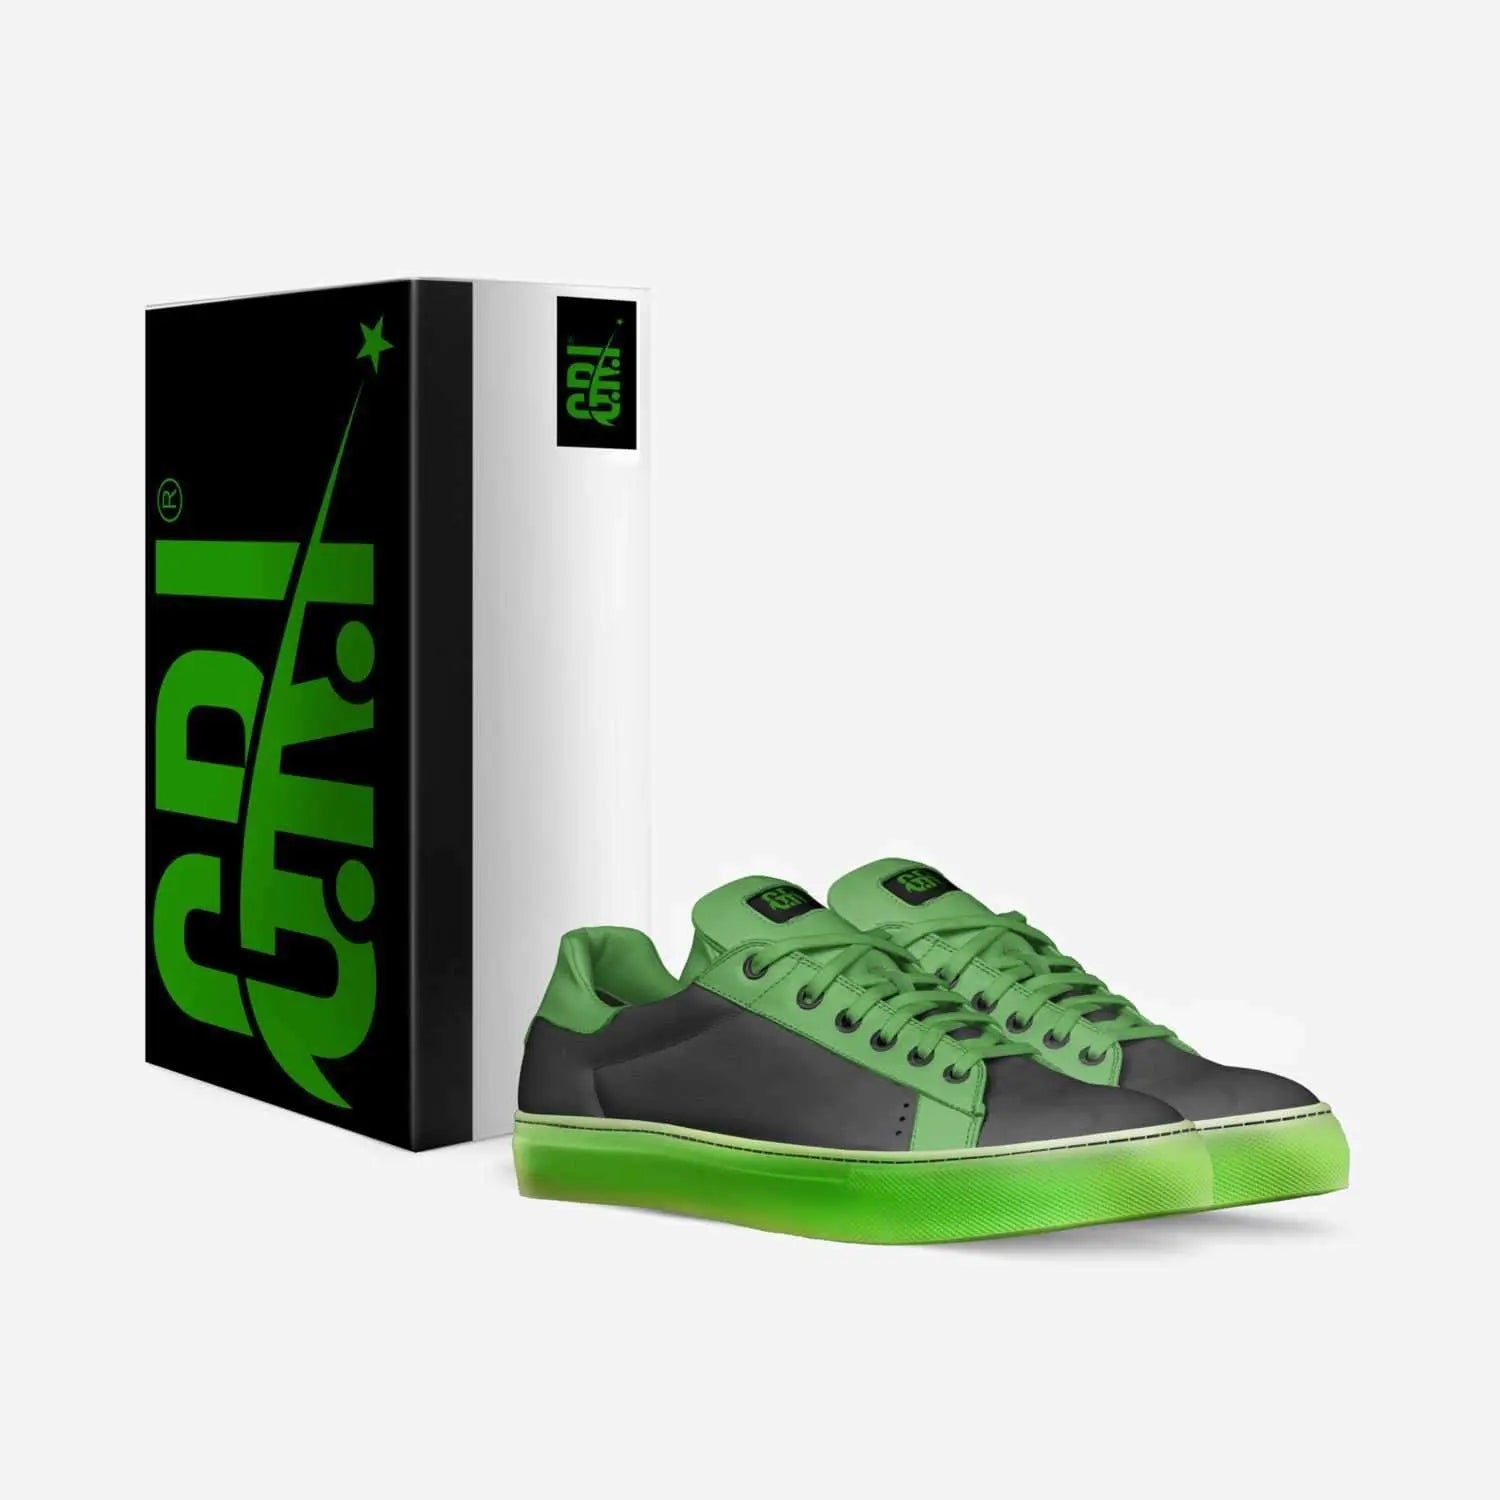 Alive Shoes | Blooming Green | Ghet2Rock International Ghet2Rock International